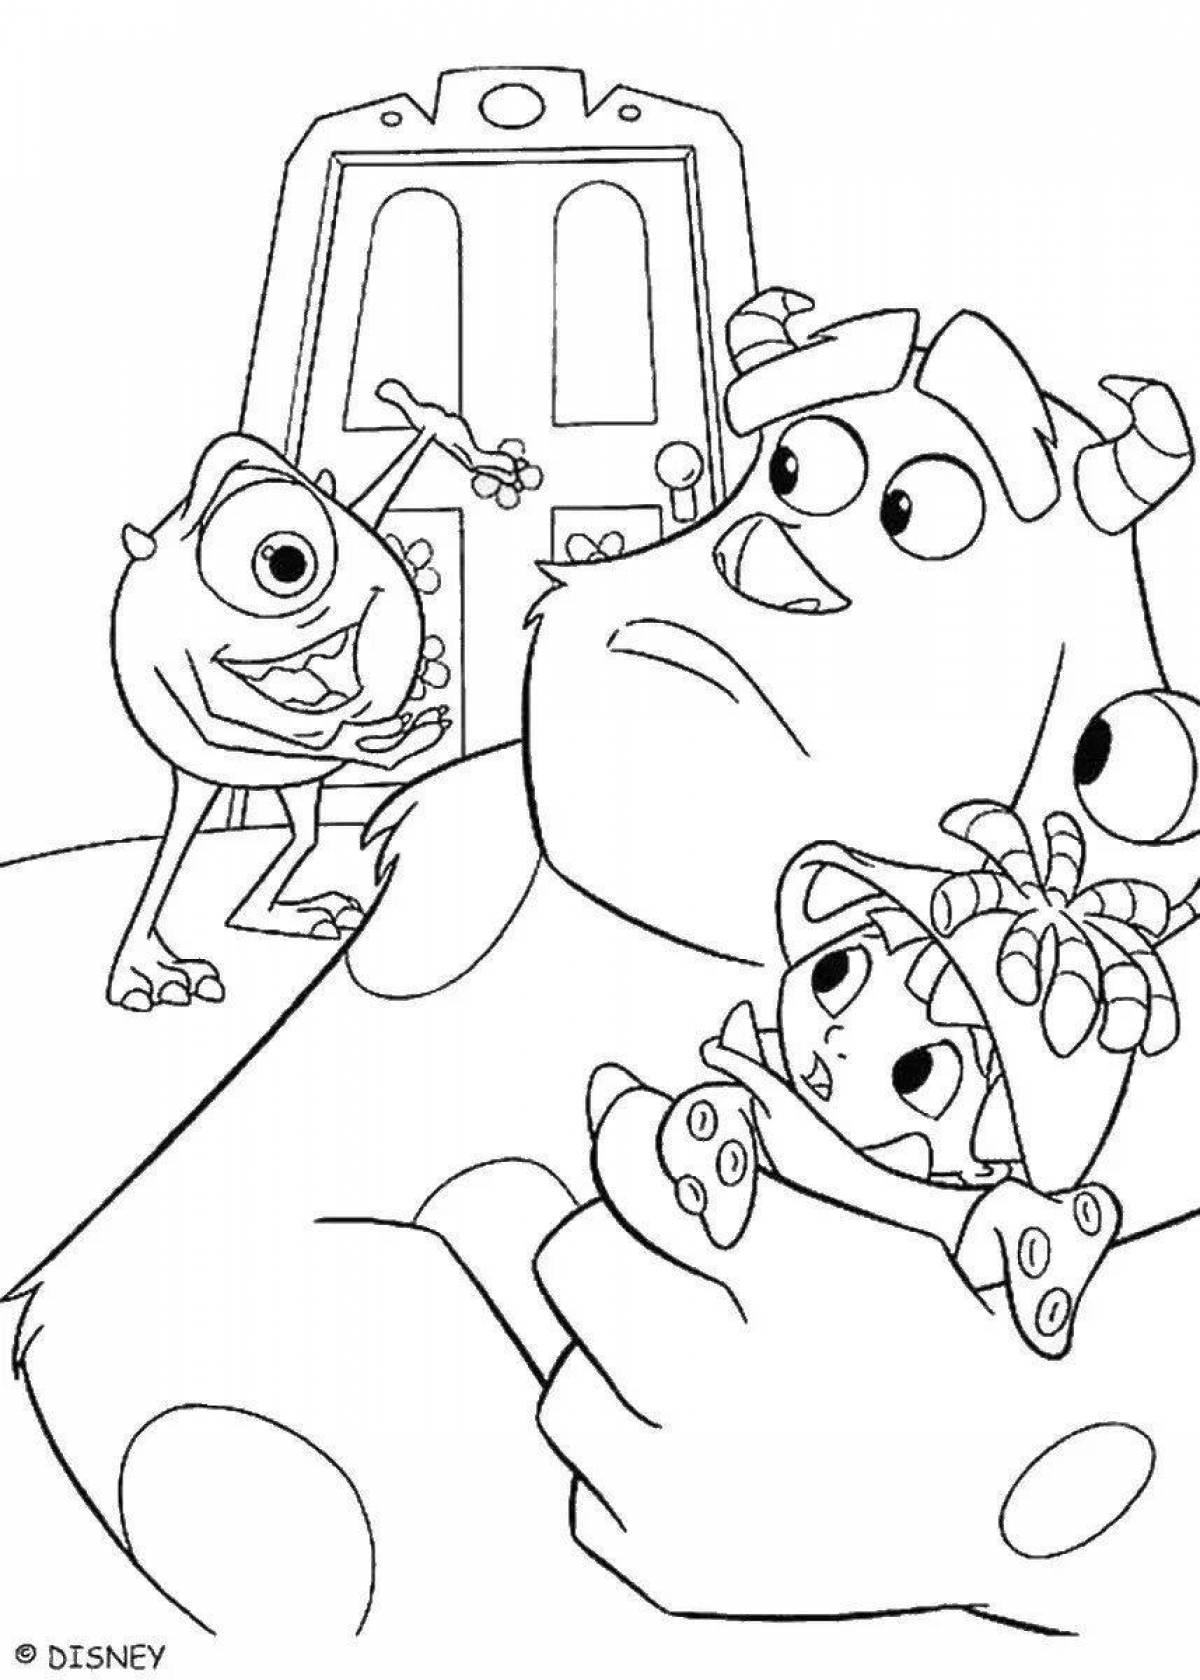 Fabulous Monsters Inc coloring book for kids